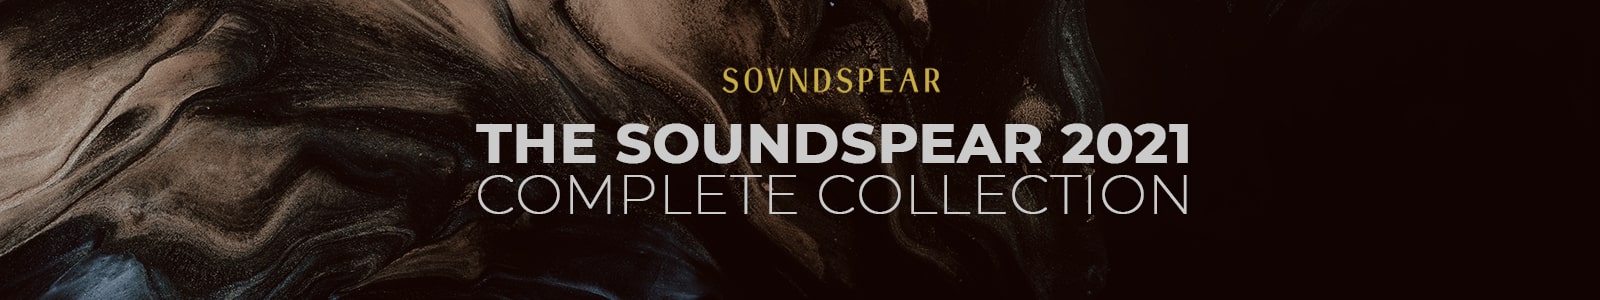 SOUNDSPEAR 22021 COMPLETE COLLECTION